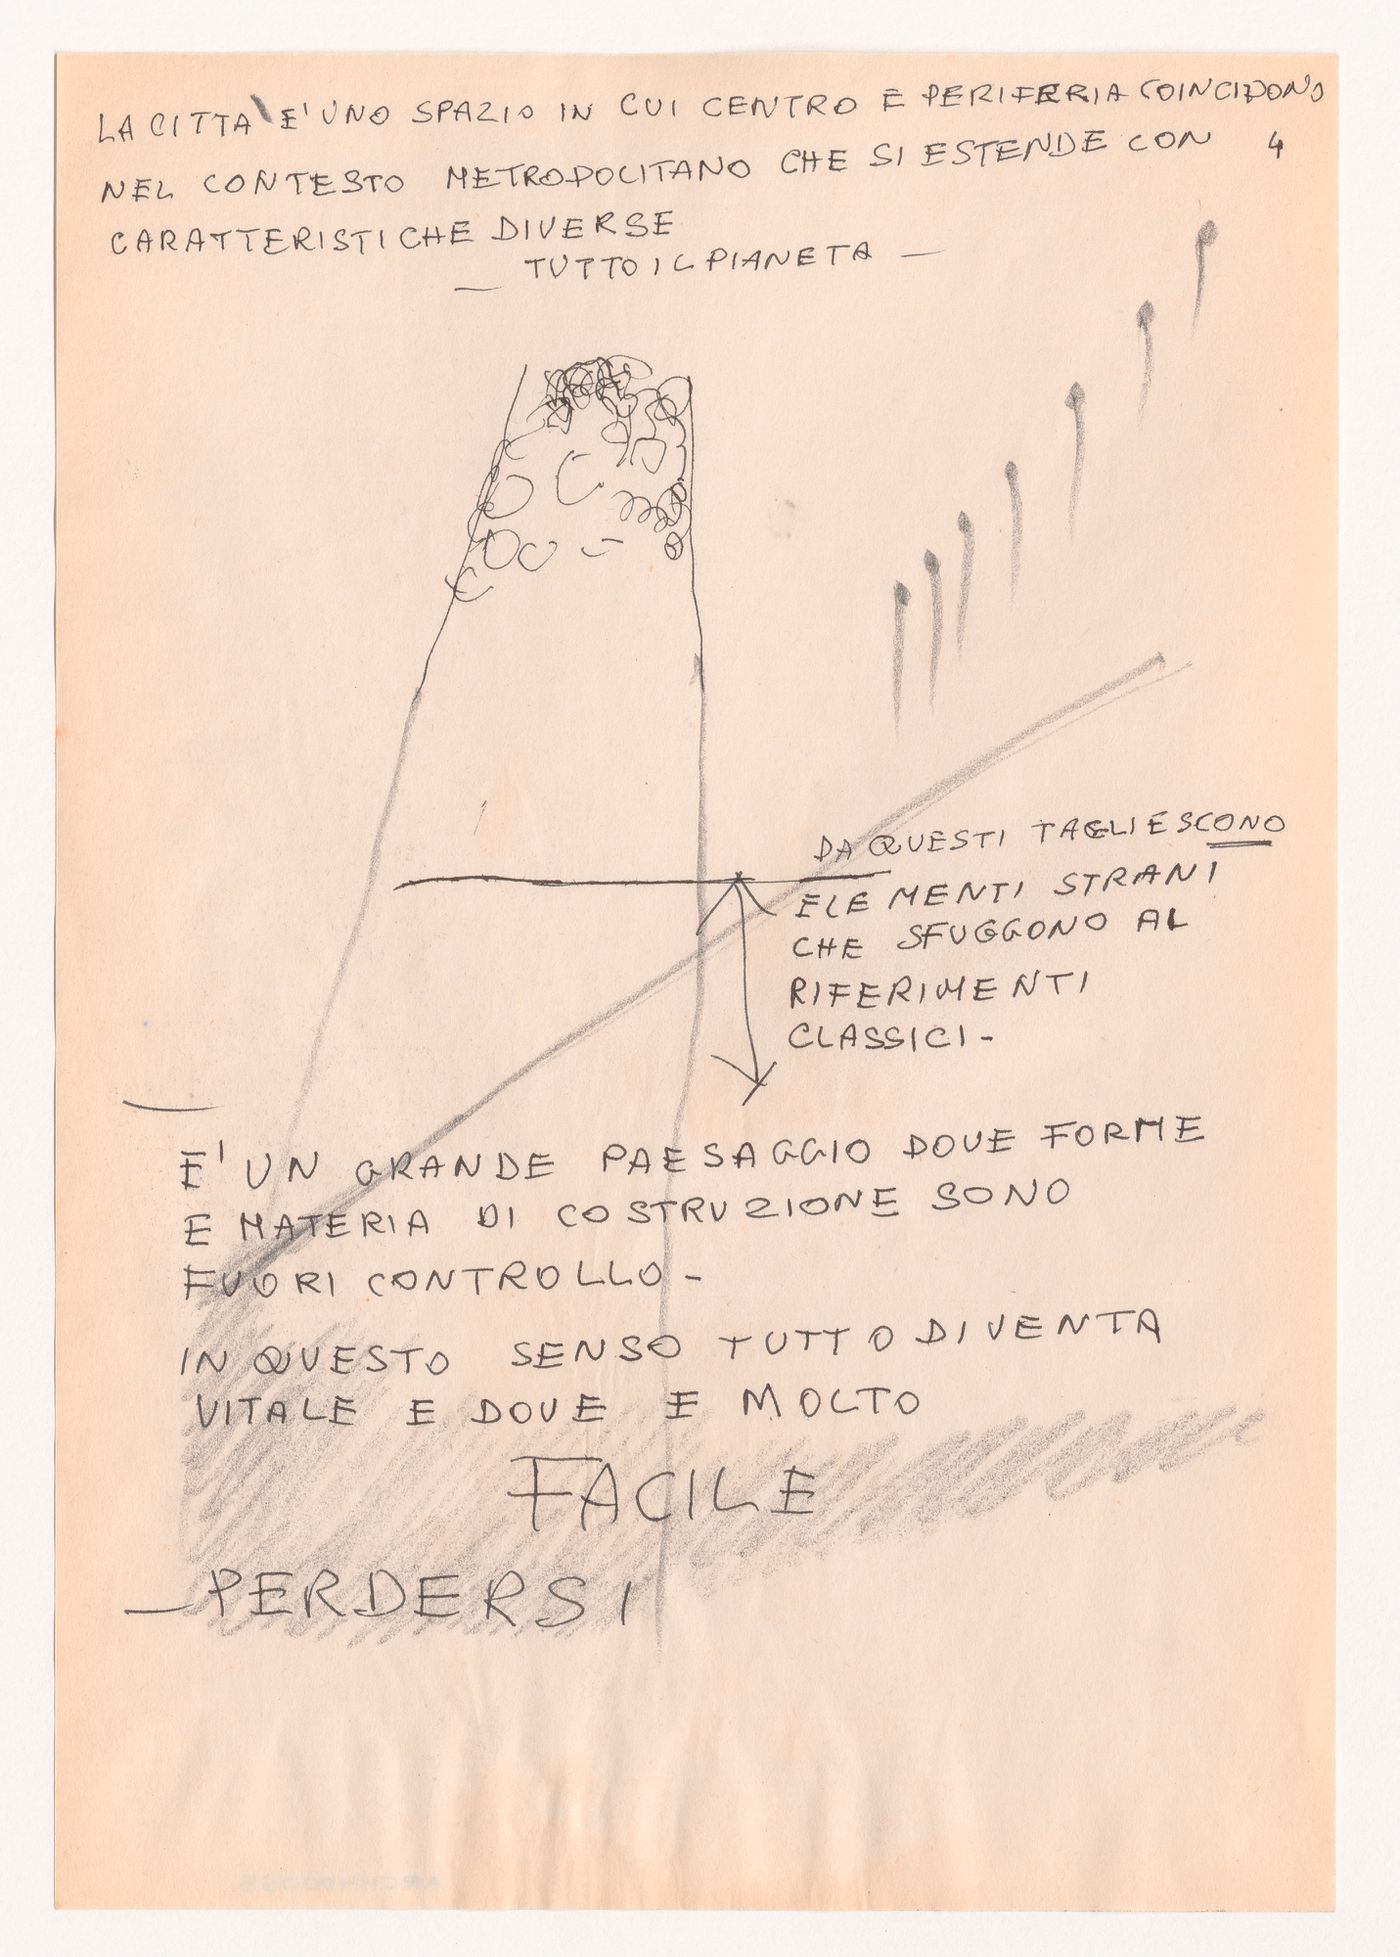 Notes and sketch for Breve racconto di Architettura [Brief tale of architecture]